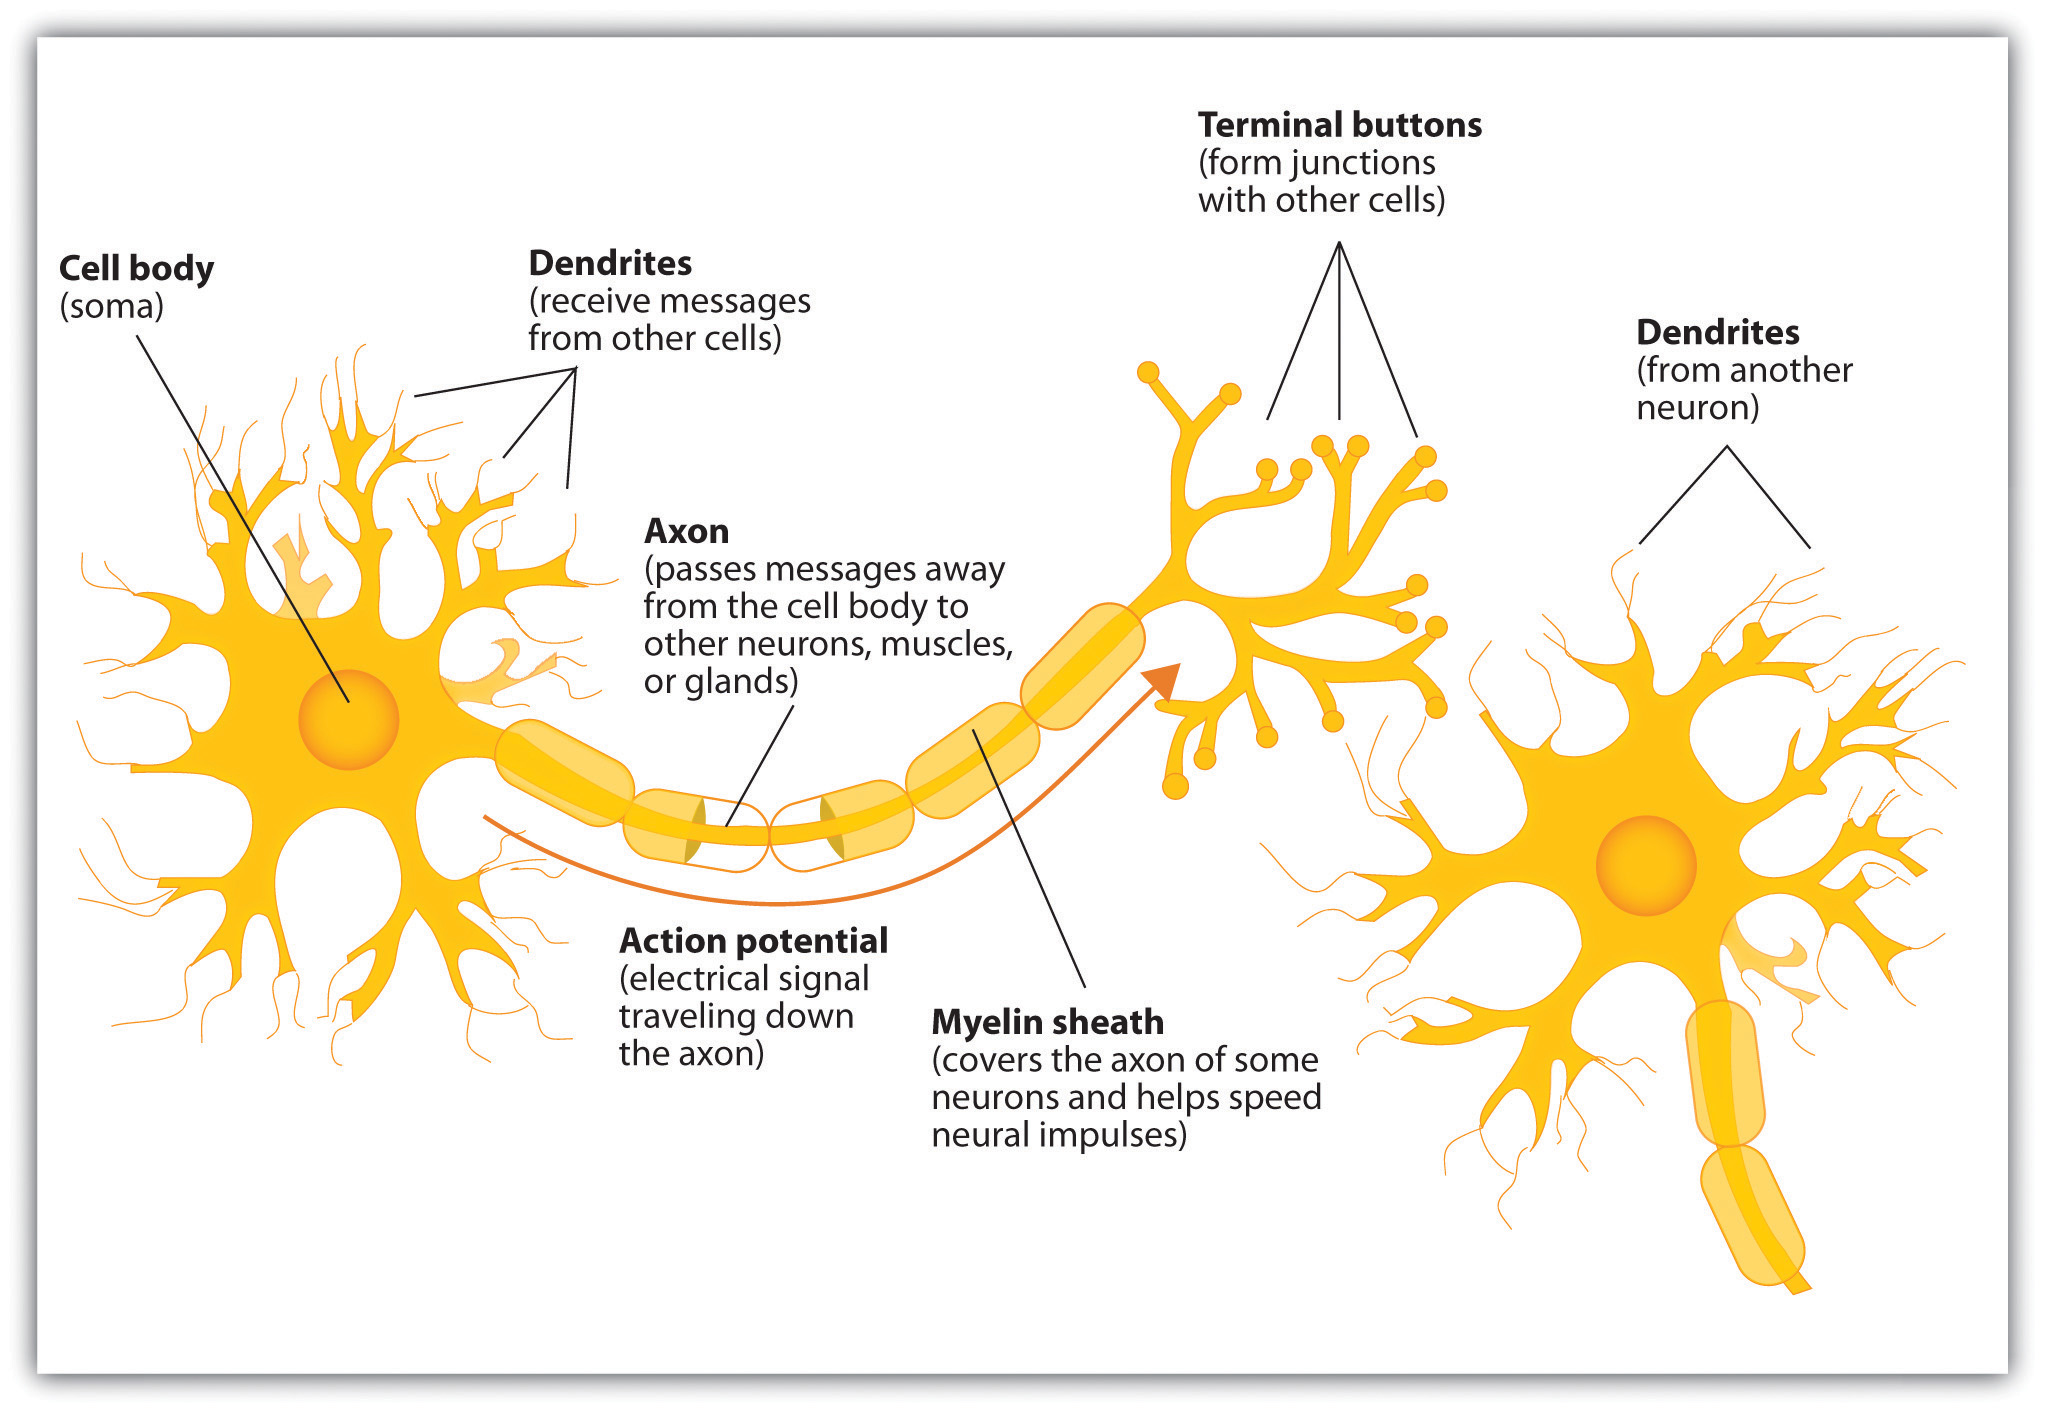 A graphic showing the Components of a Neuron: the cell body, dendrites, axon, action potential, myelin sheath, terminal buttons and the dendrites.